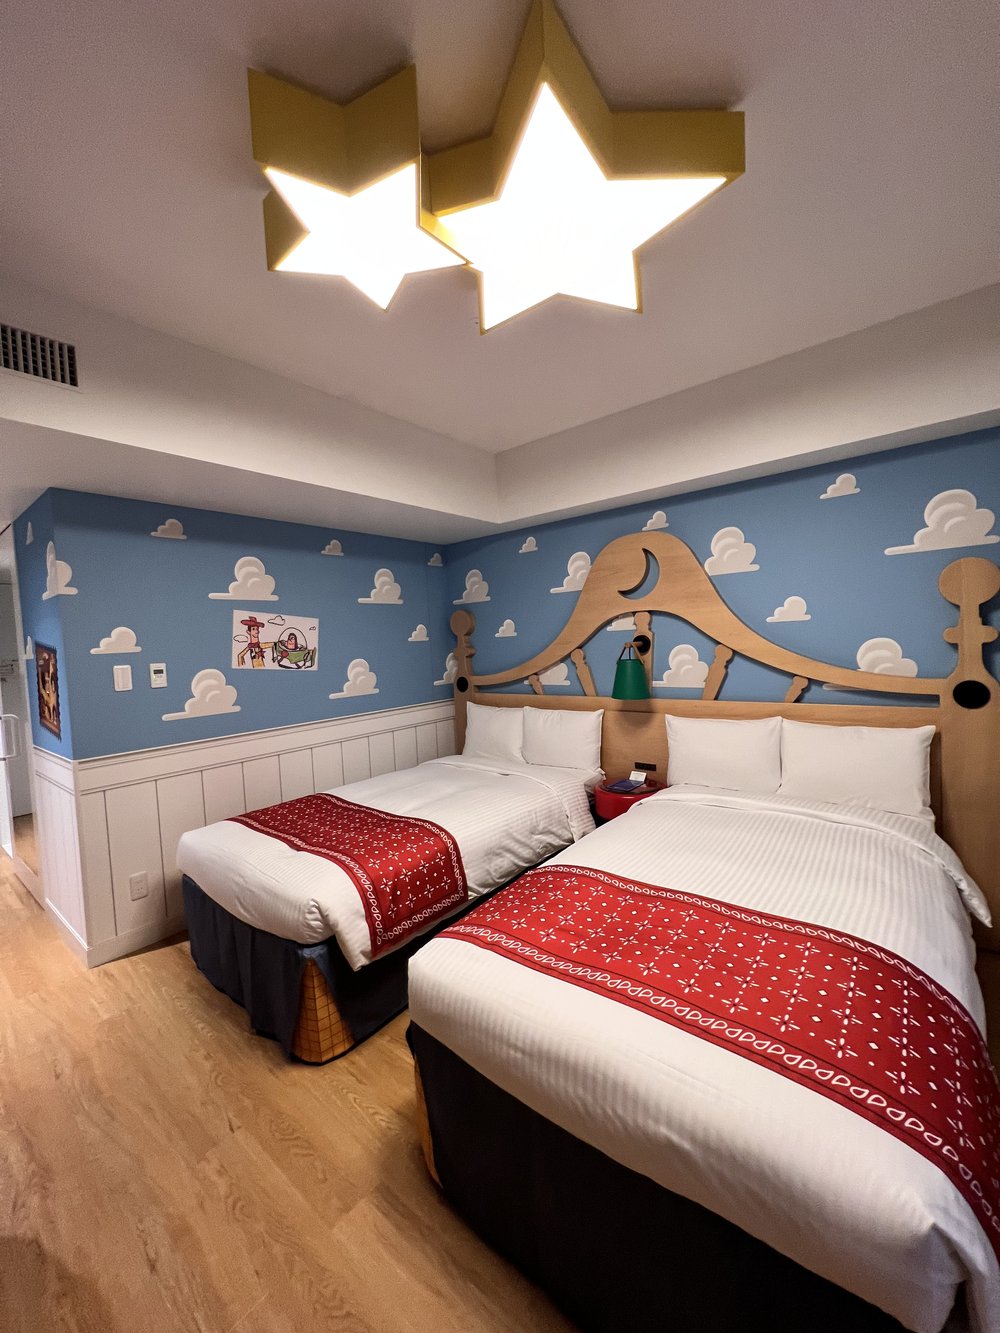  Zoomed out view of the Toy Story Hotel bedroom with two beds, star lights, and cloud wallpaper 